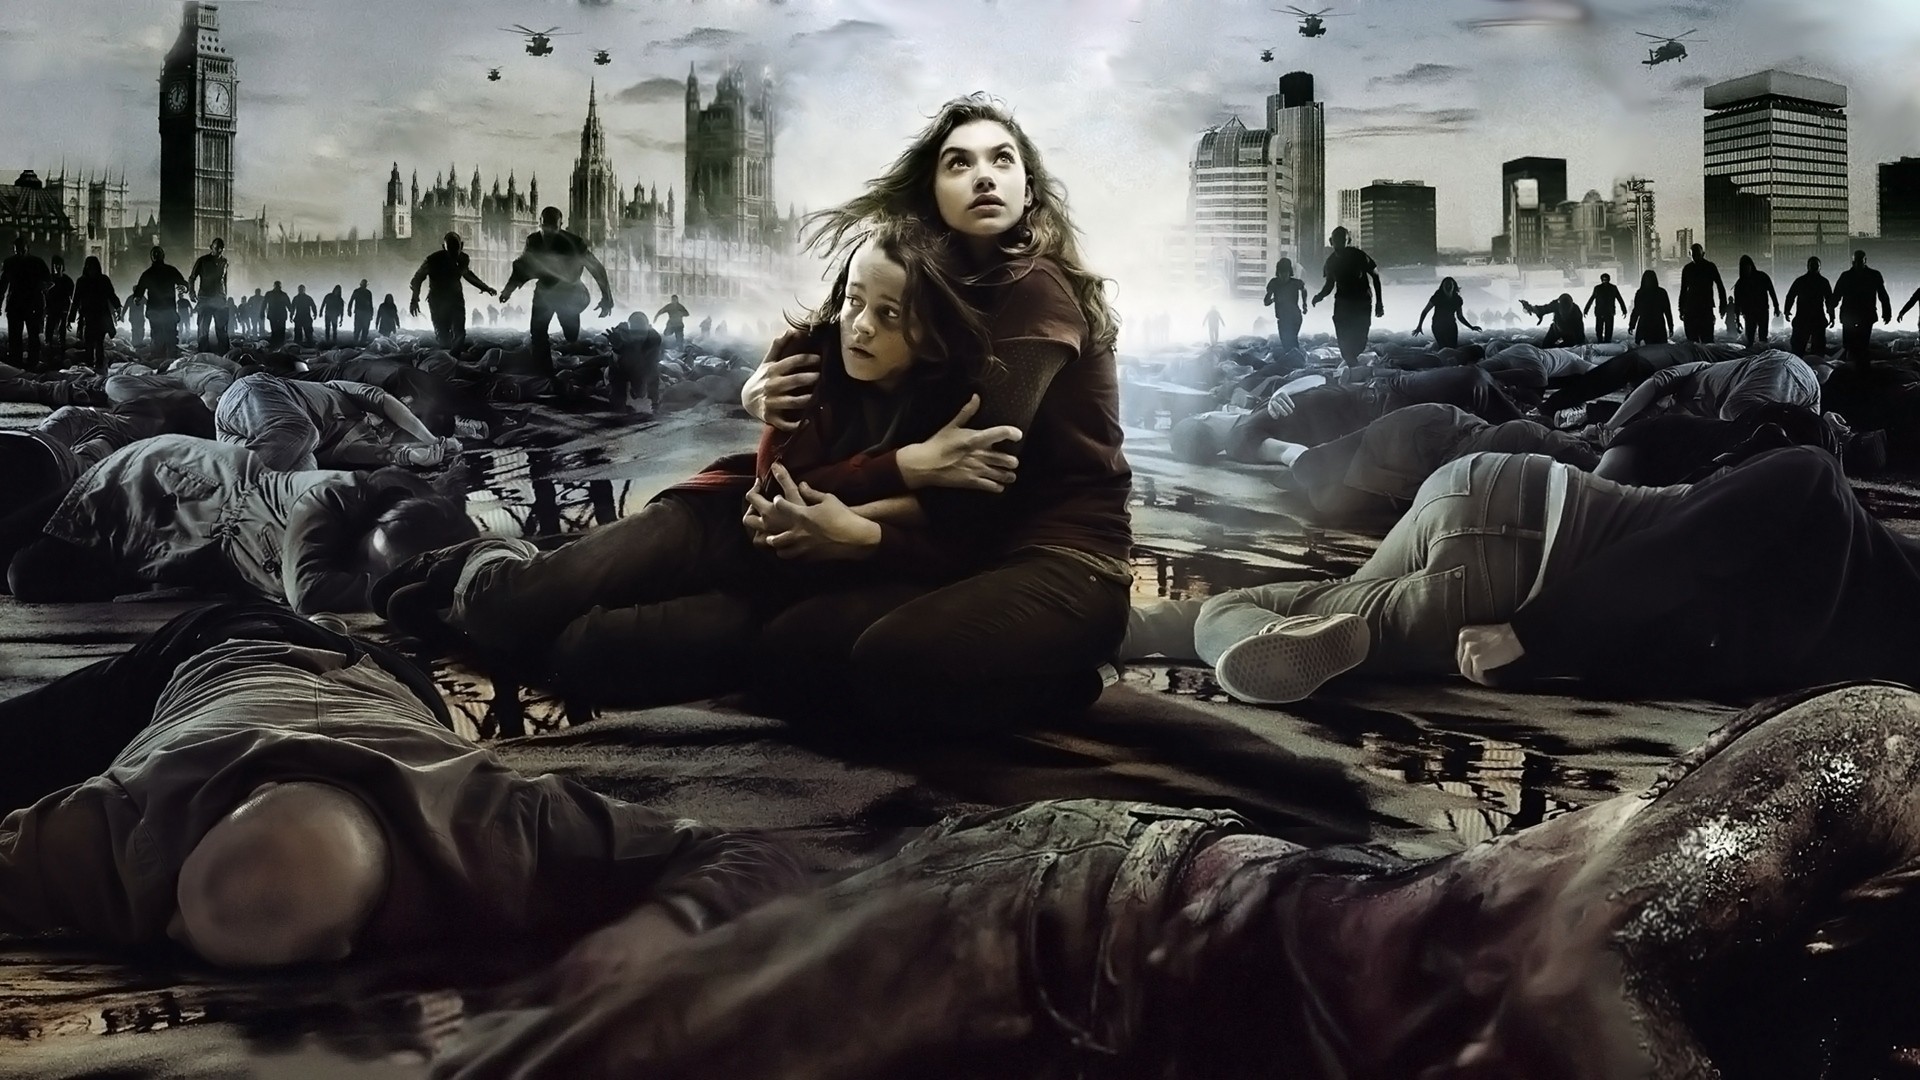 28 Weeks Later #7